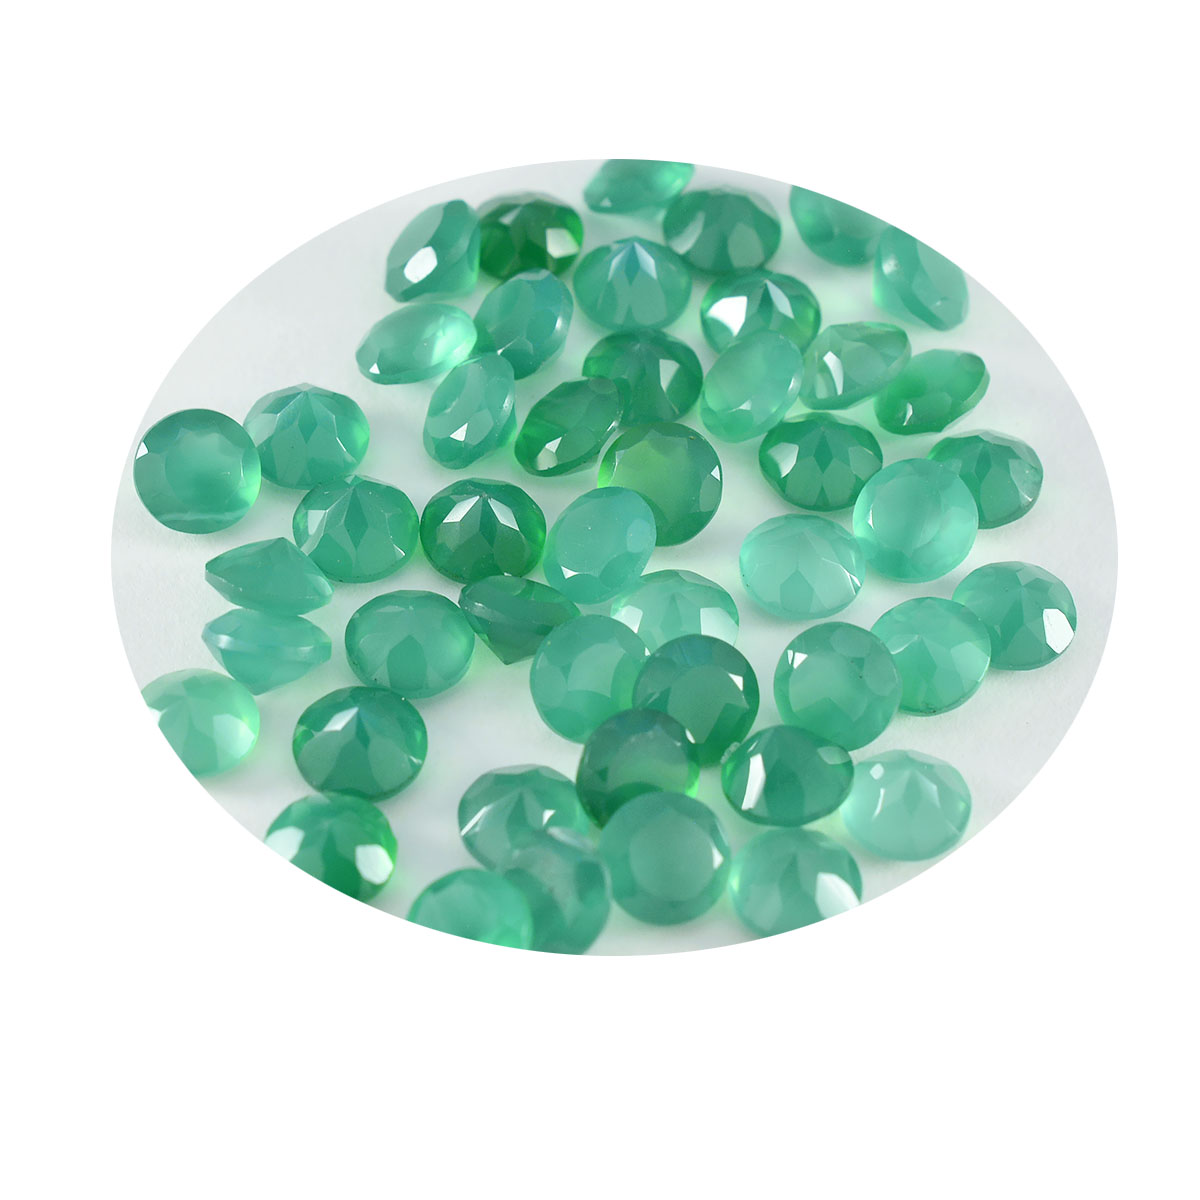 Riyogems 1PC Real Green Onyx Faceted 3x3 mm Round Shape A+ Quality Loose Stone